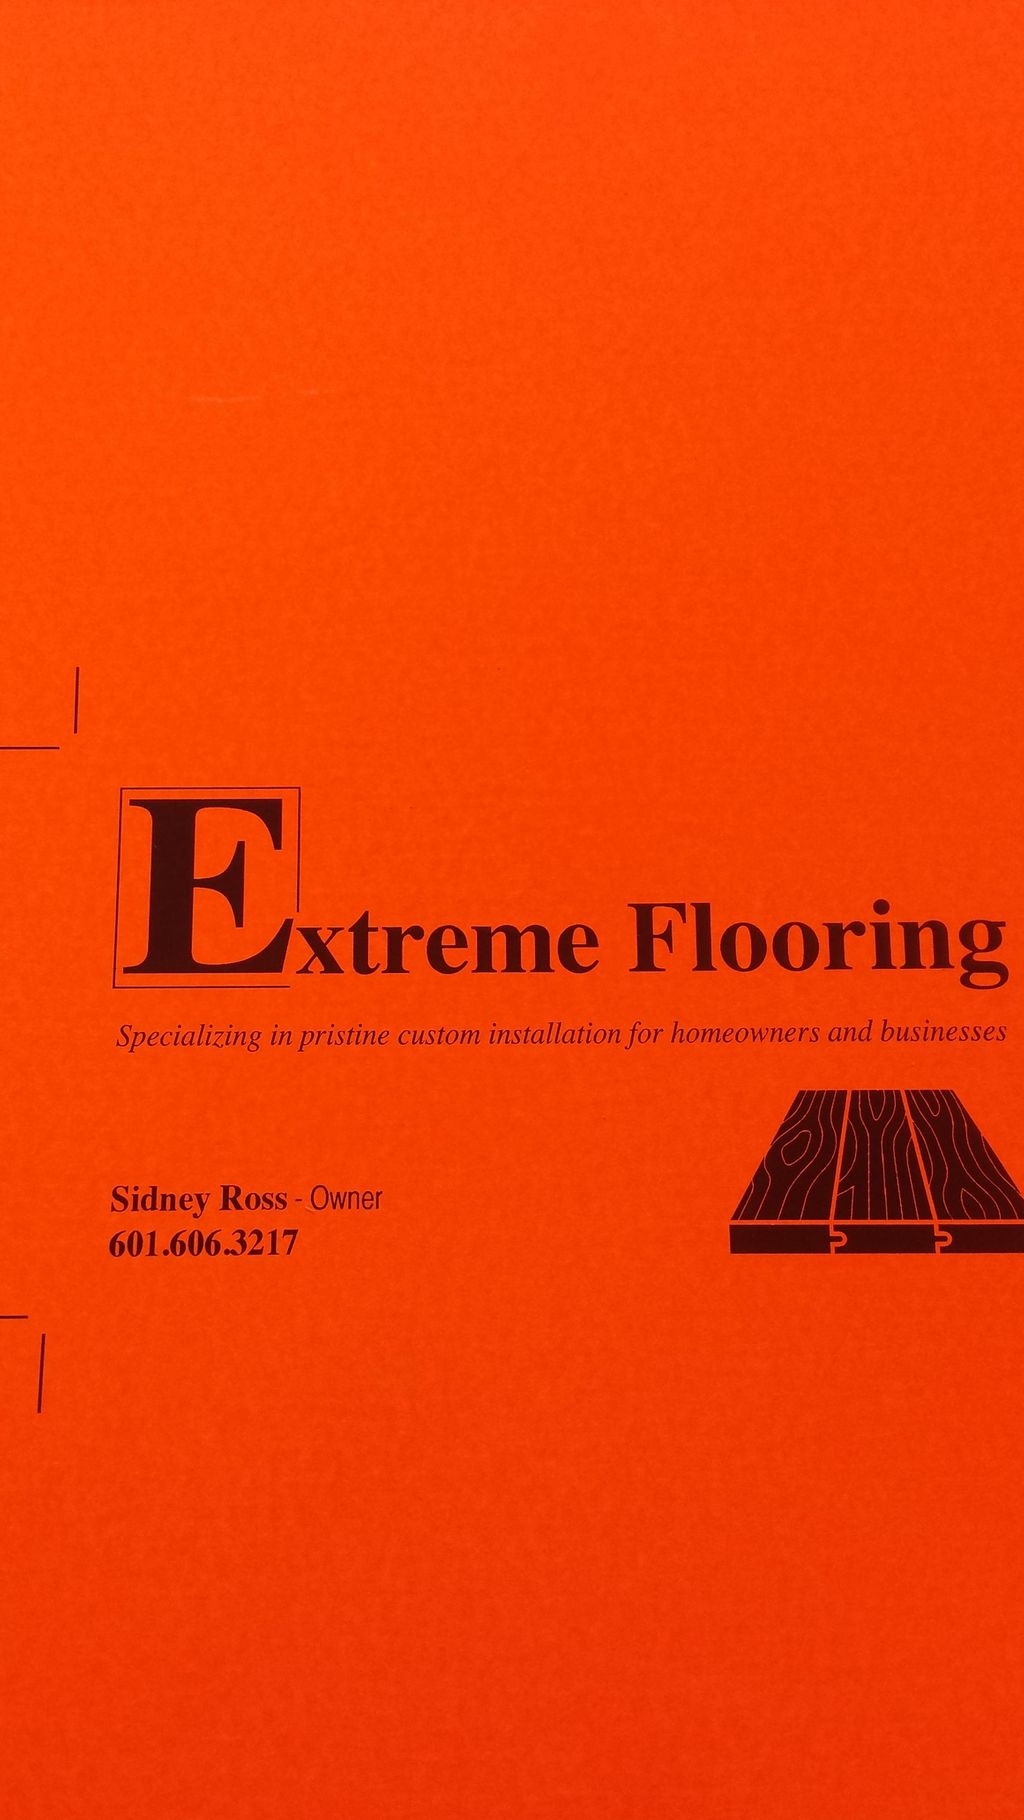 extreme flooring of south Mississippi on Facebook